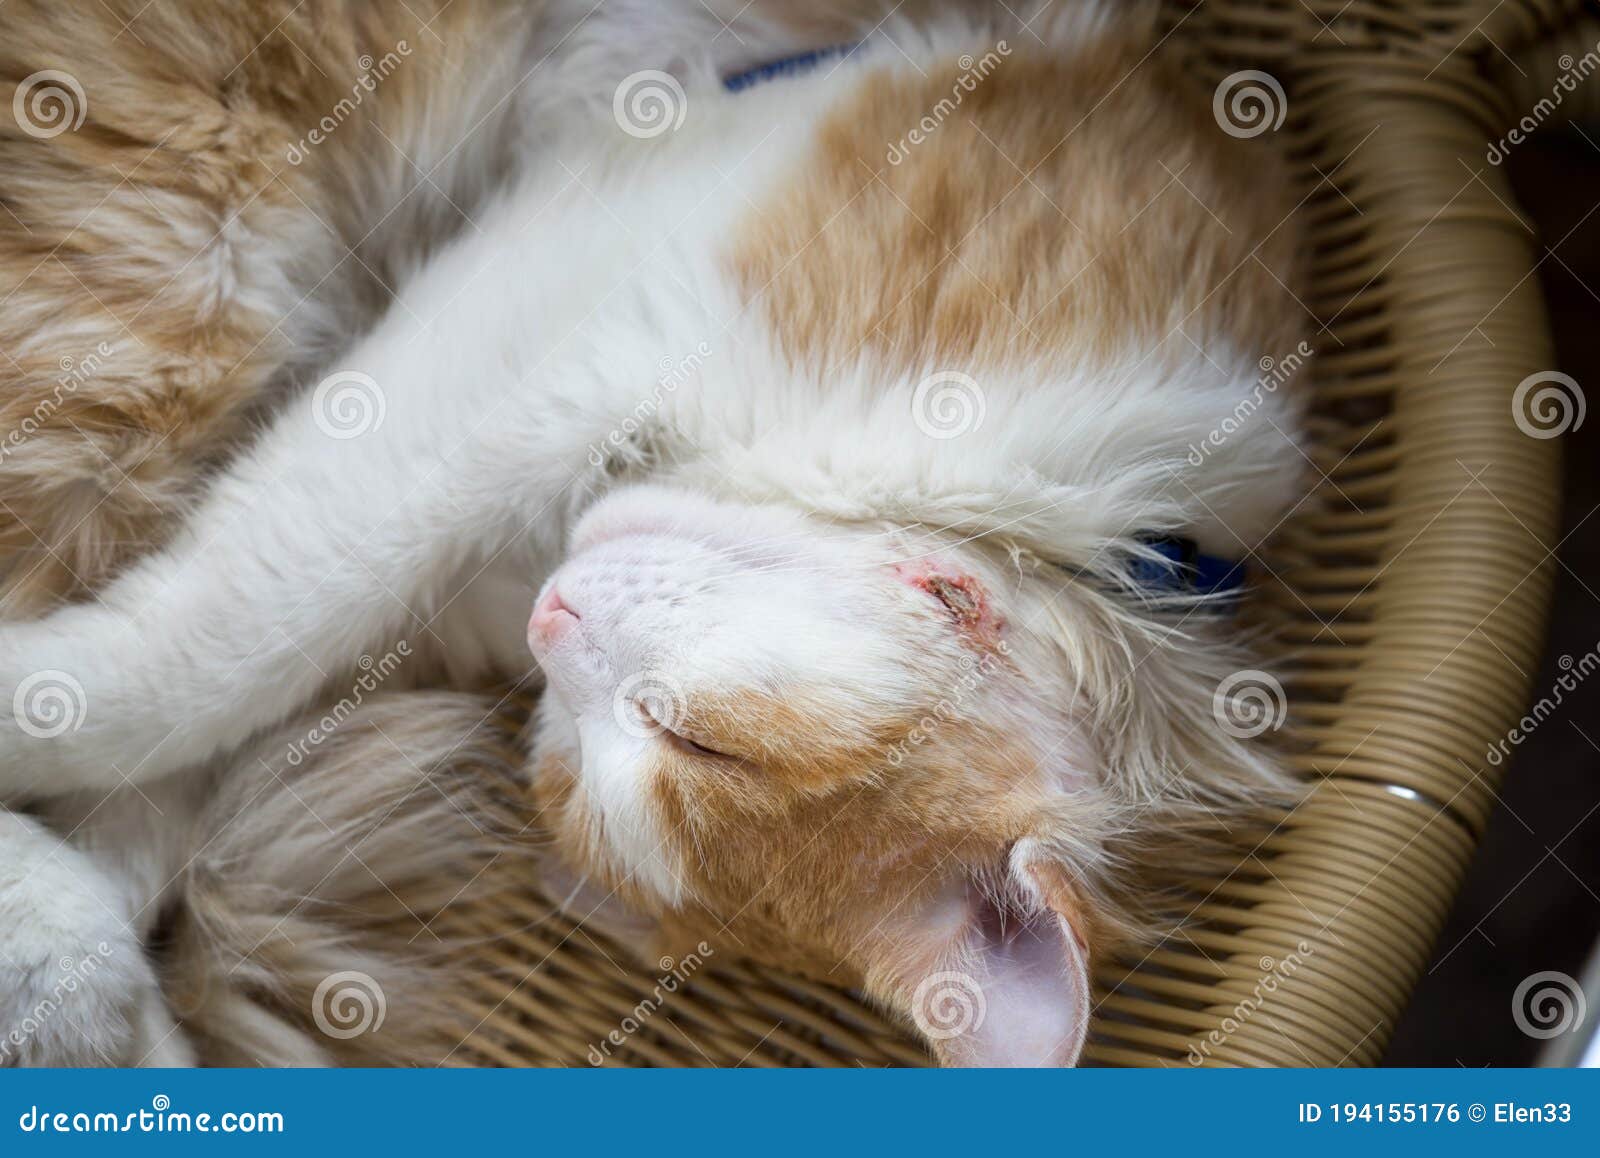 The Cat Sleeps With A Wound Healing Abscess On His Cheek Stock Photo